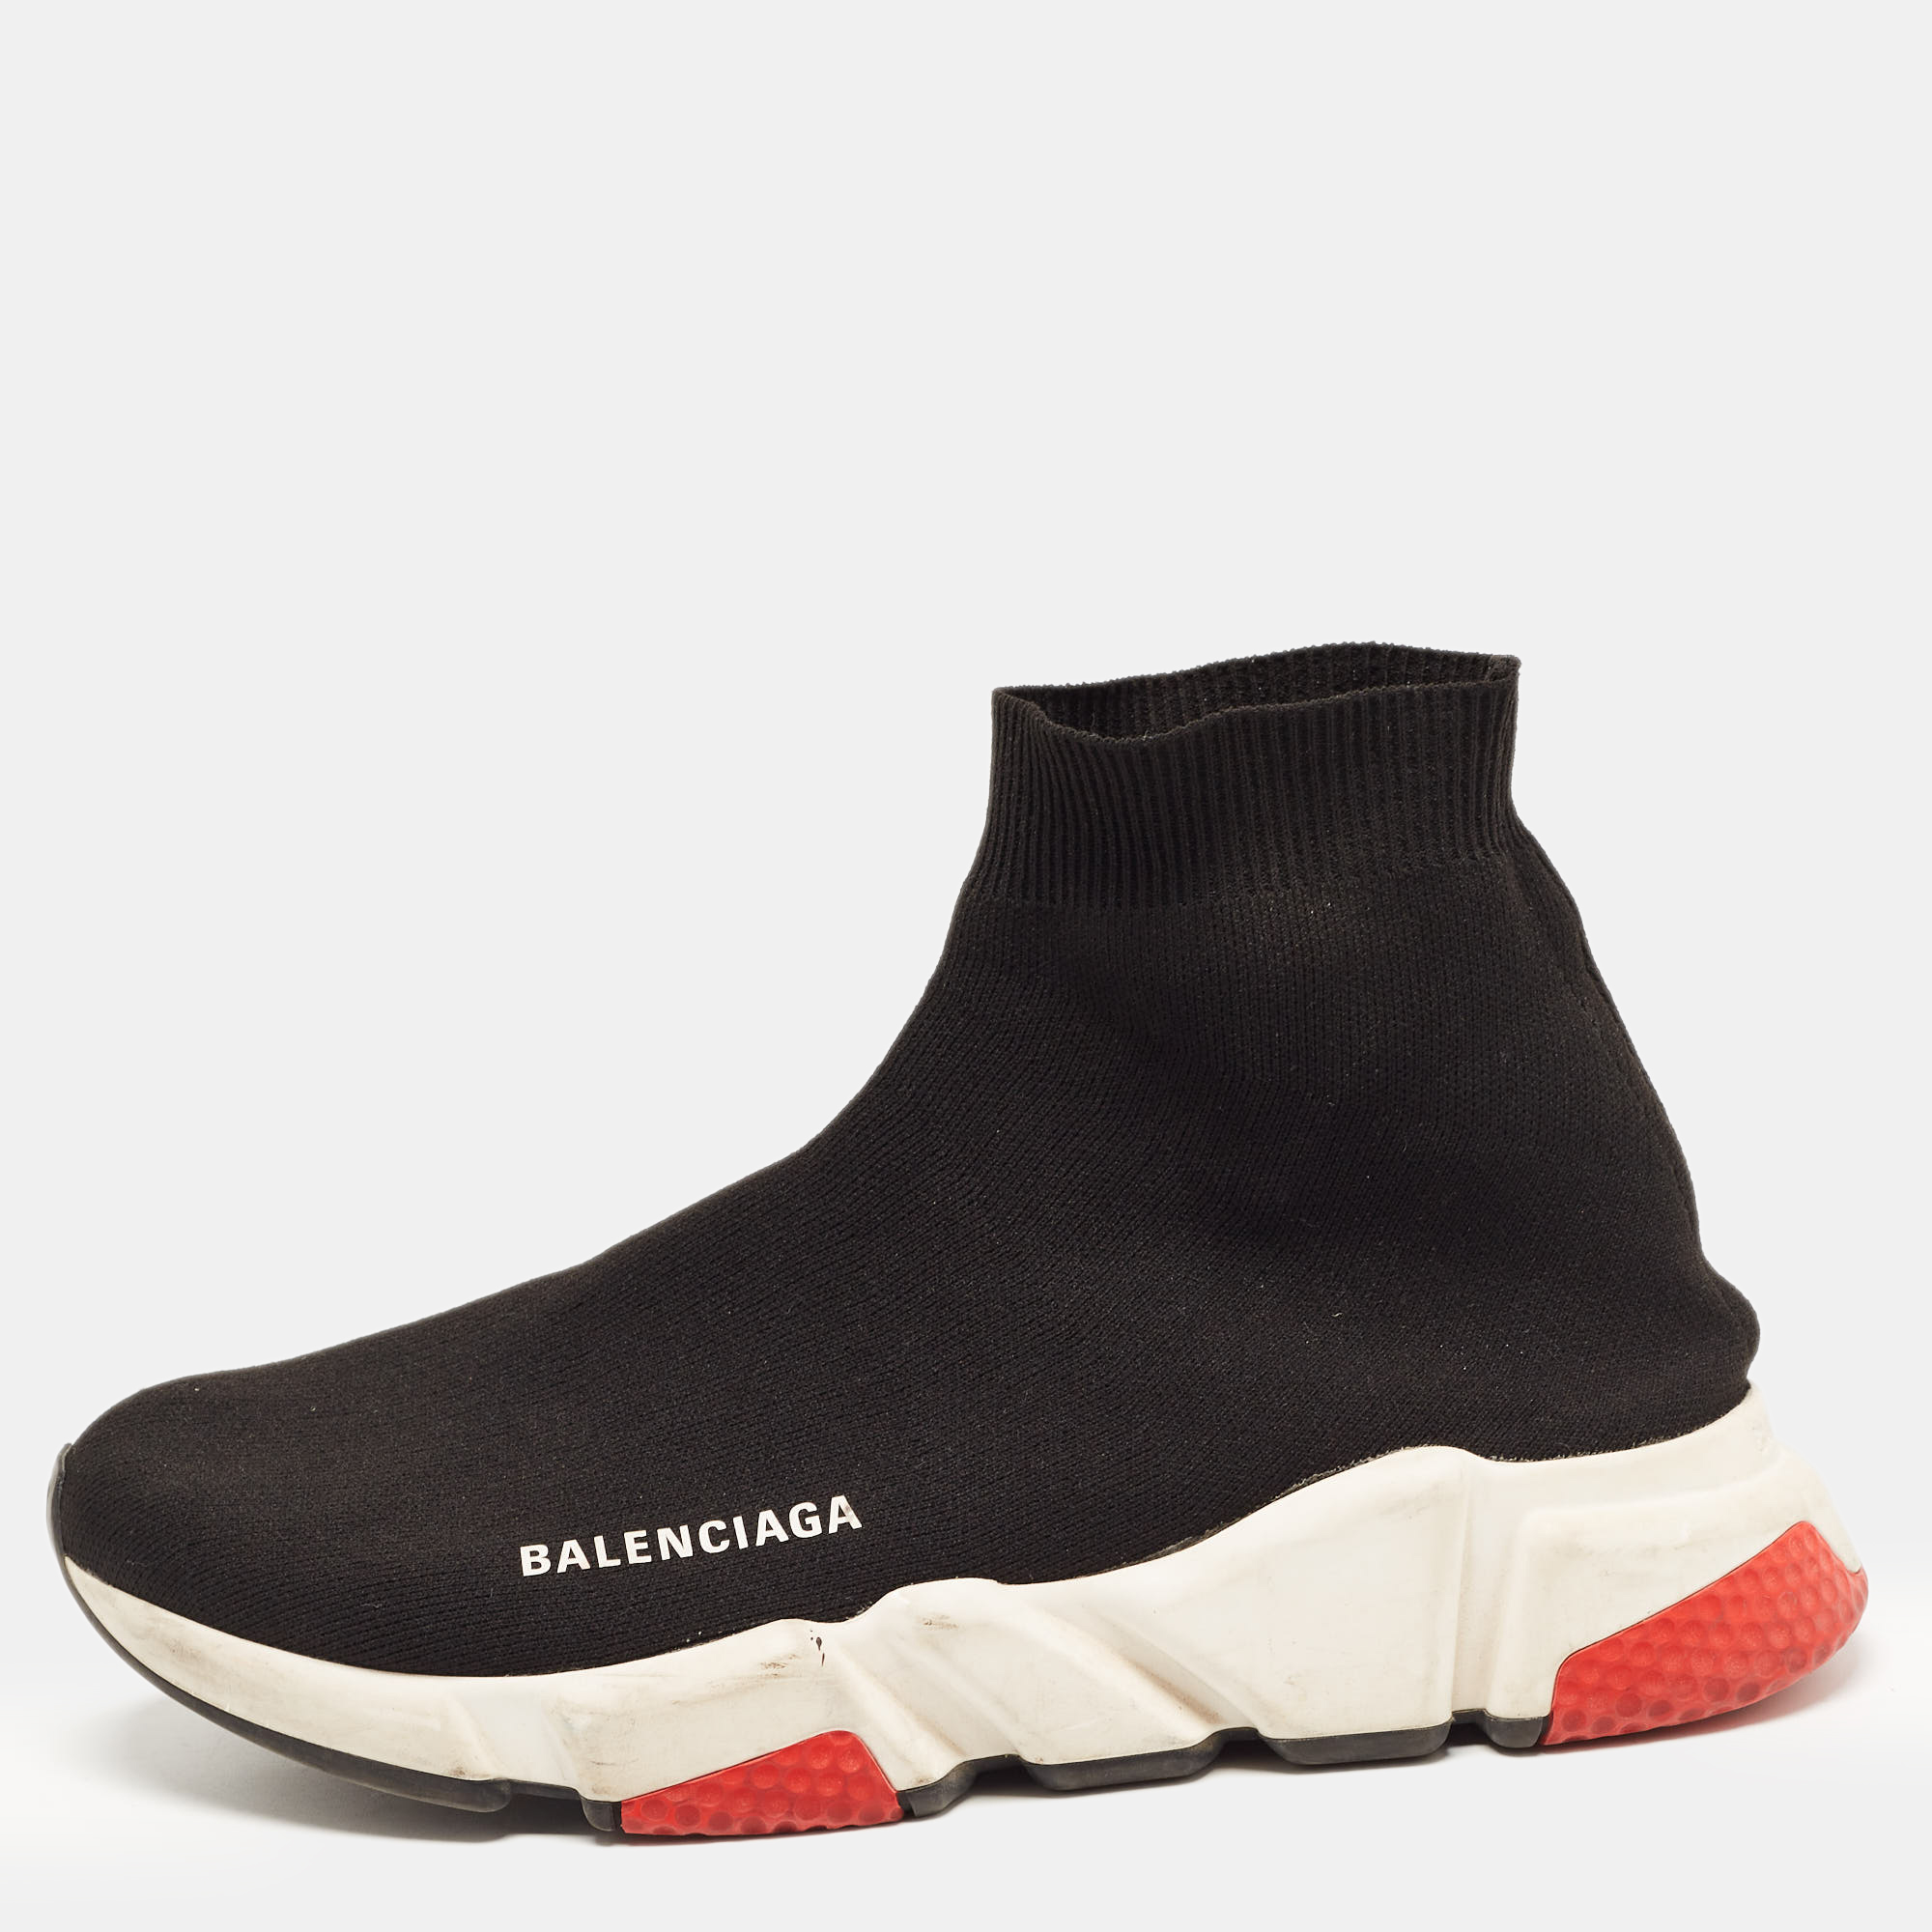 

Balenciaga Black Knit Fabric Speed Trainer High Top Sneakers Size